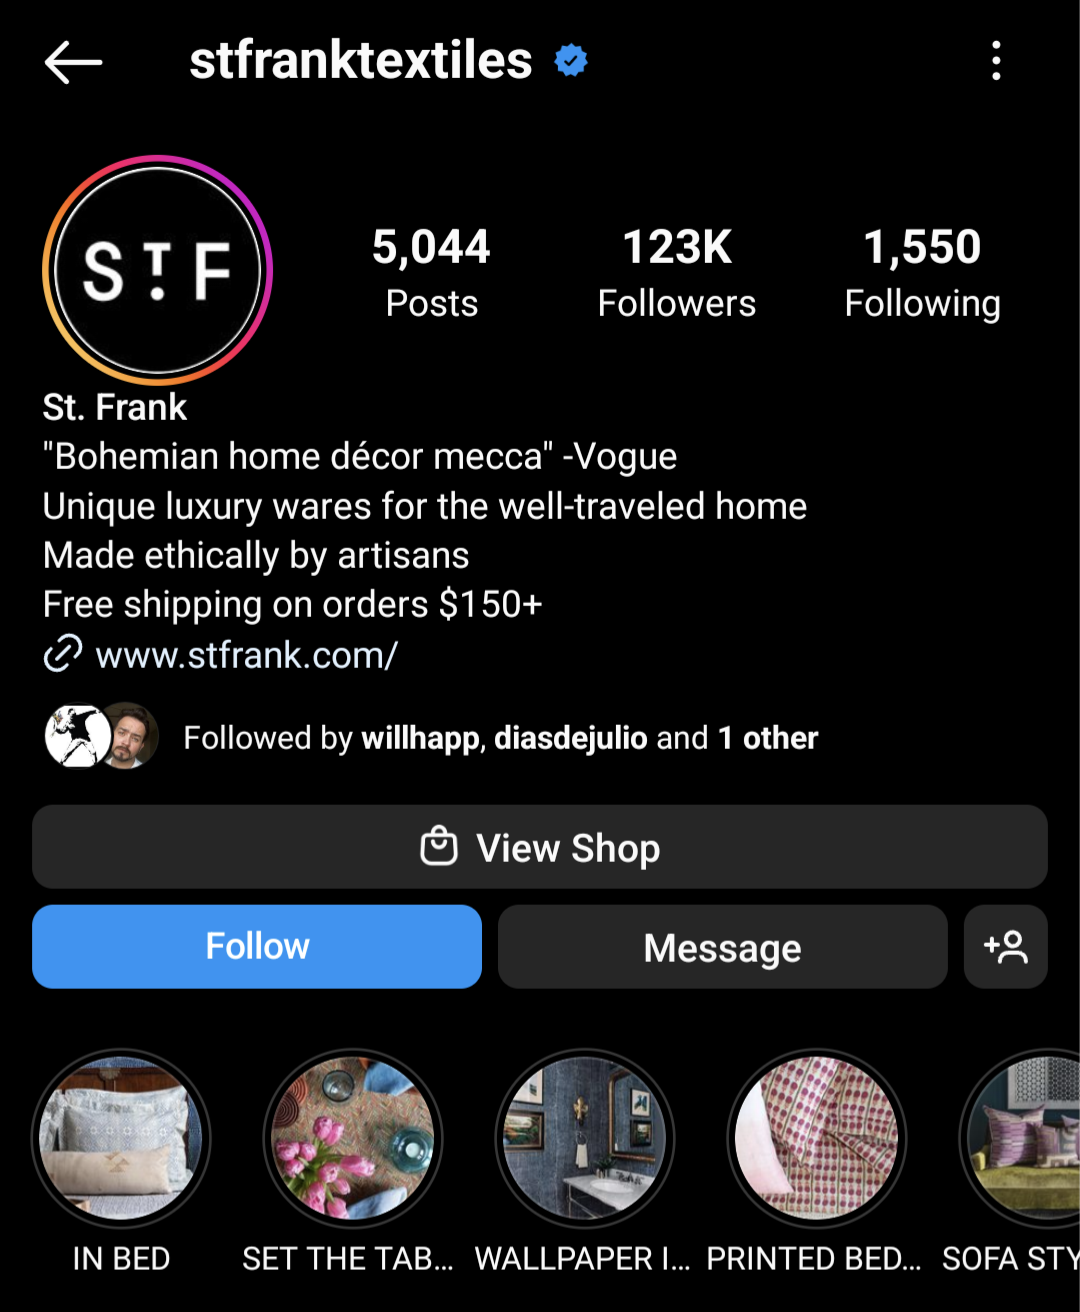 St Frank uses social proof in its Instagram bio